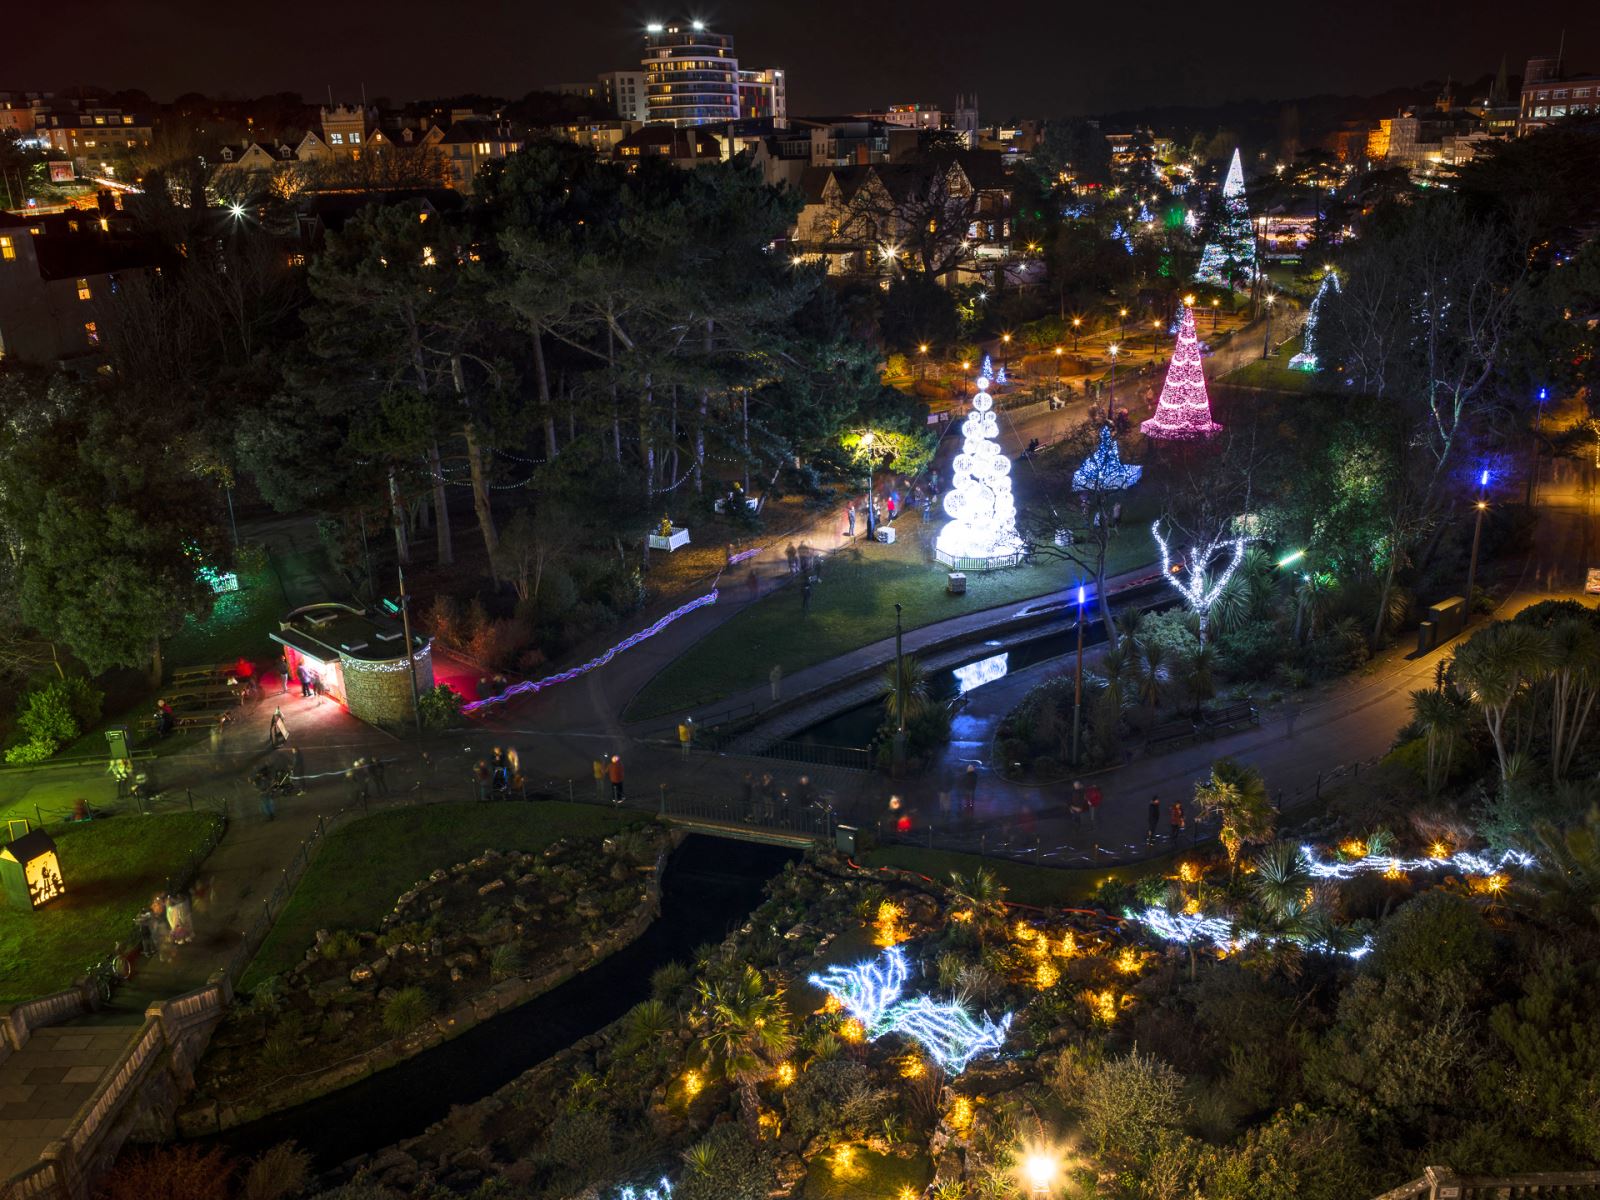 An aerial shot taken of Bournemouth's Christmas Tree Wonderland, with a pink and a white tree illuminating the night sky